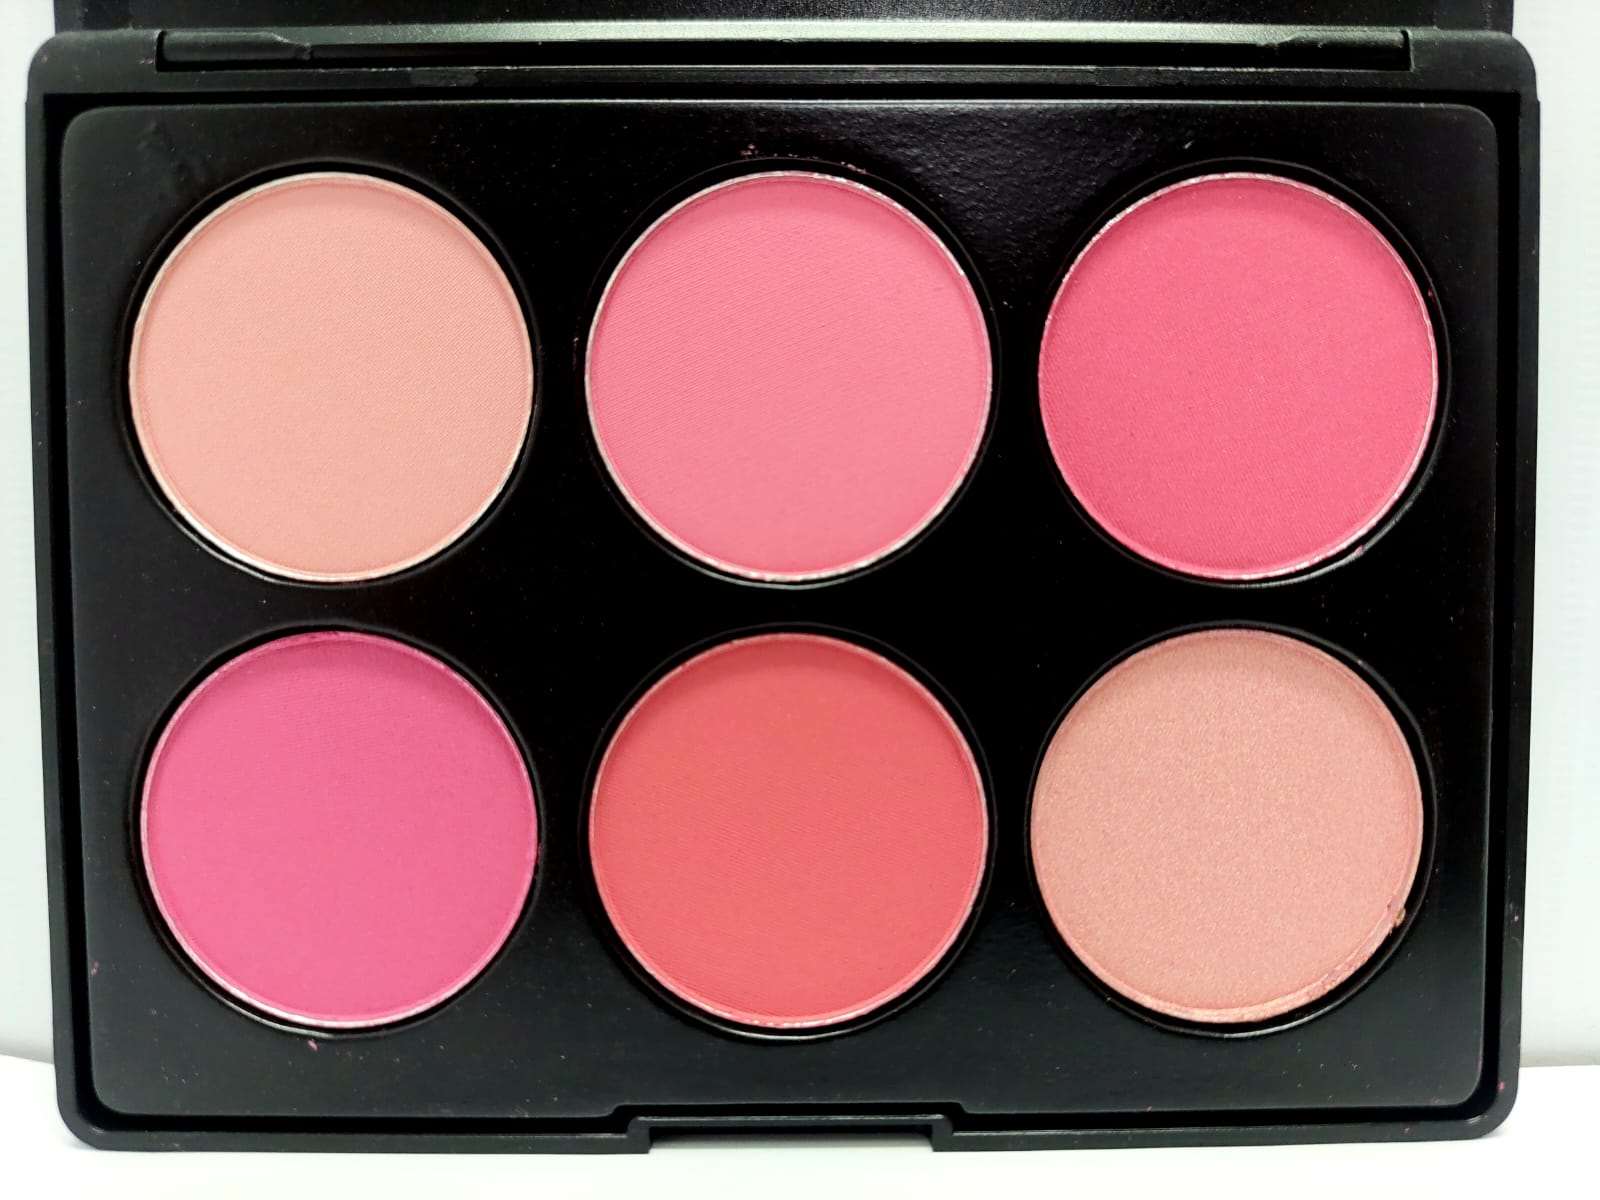 Cheek Maker Blusher Palette by Me Now - 6 Colors - A